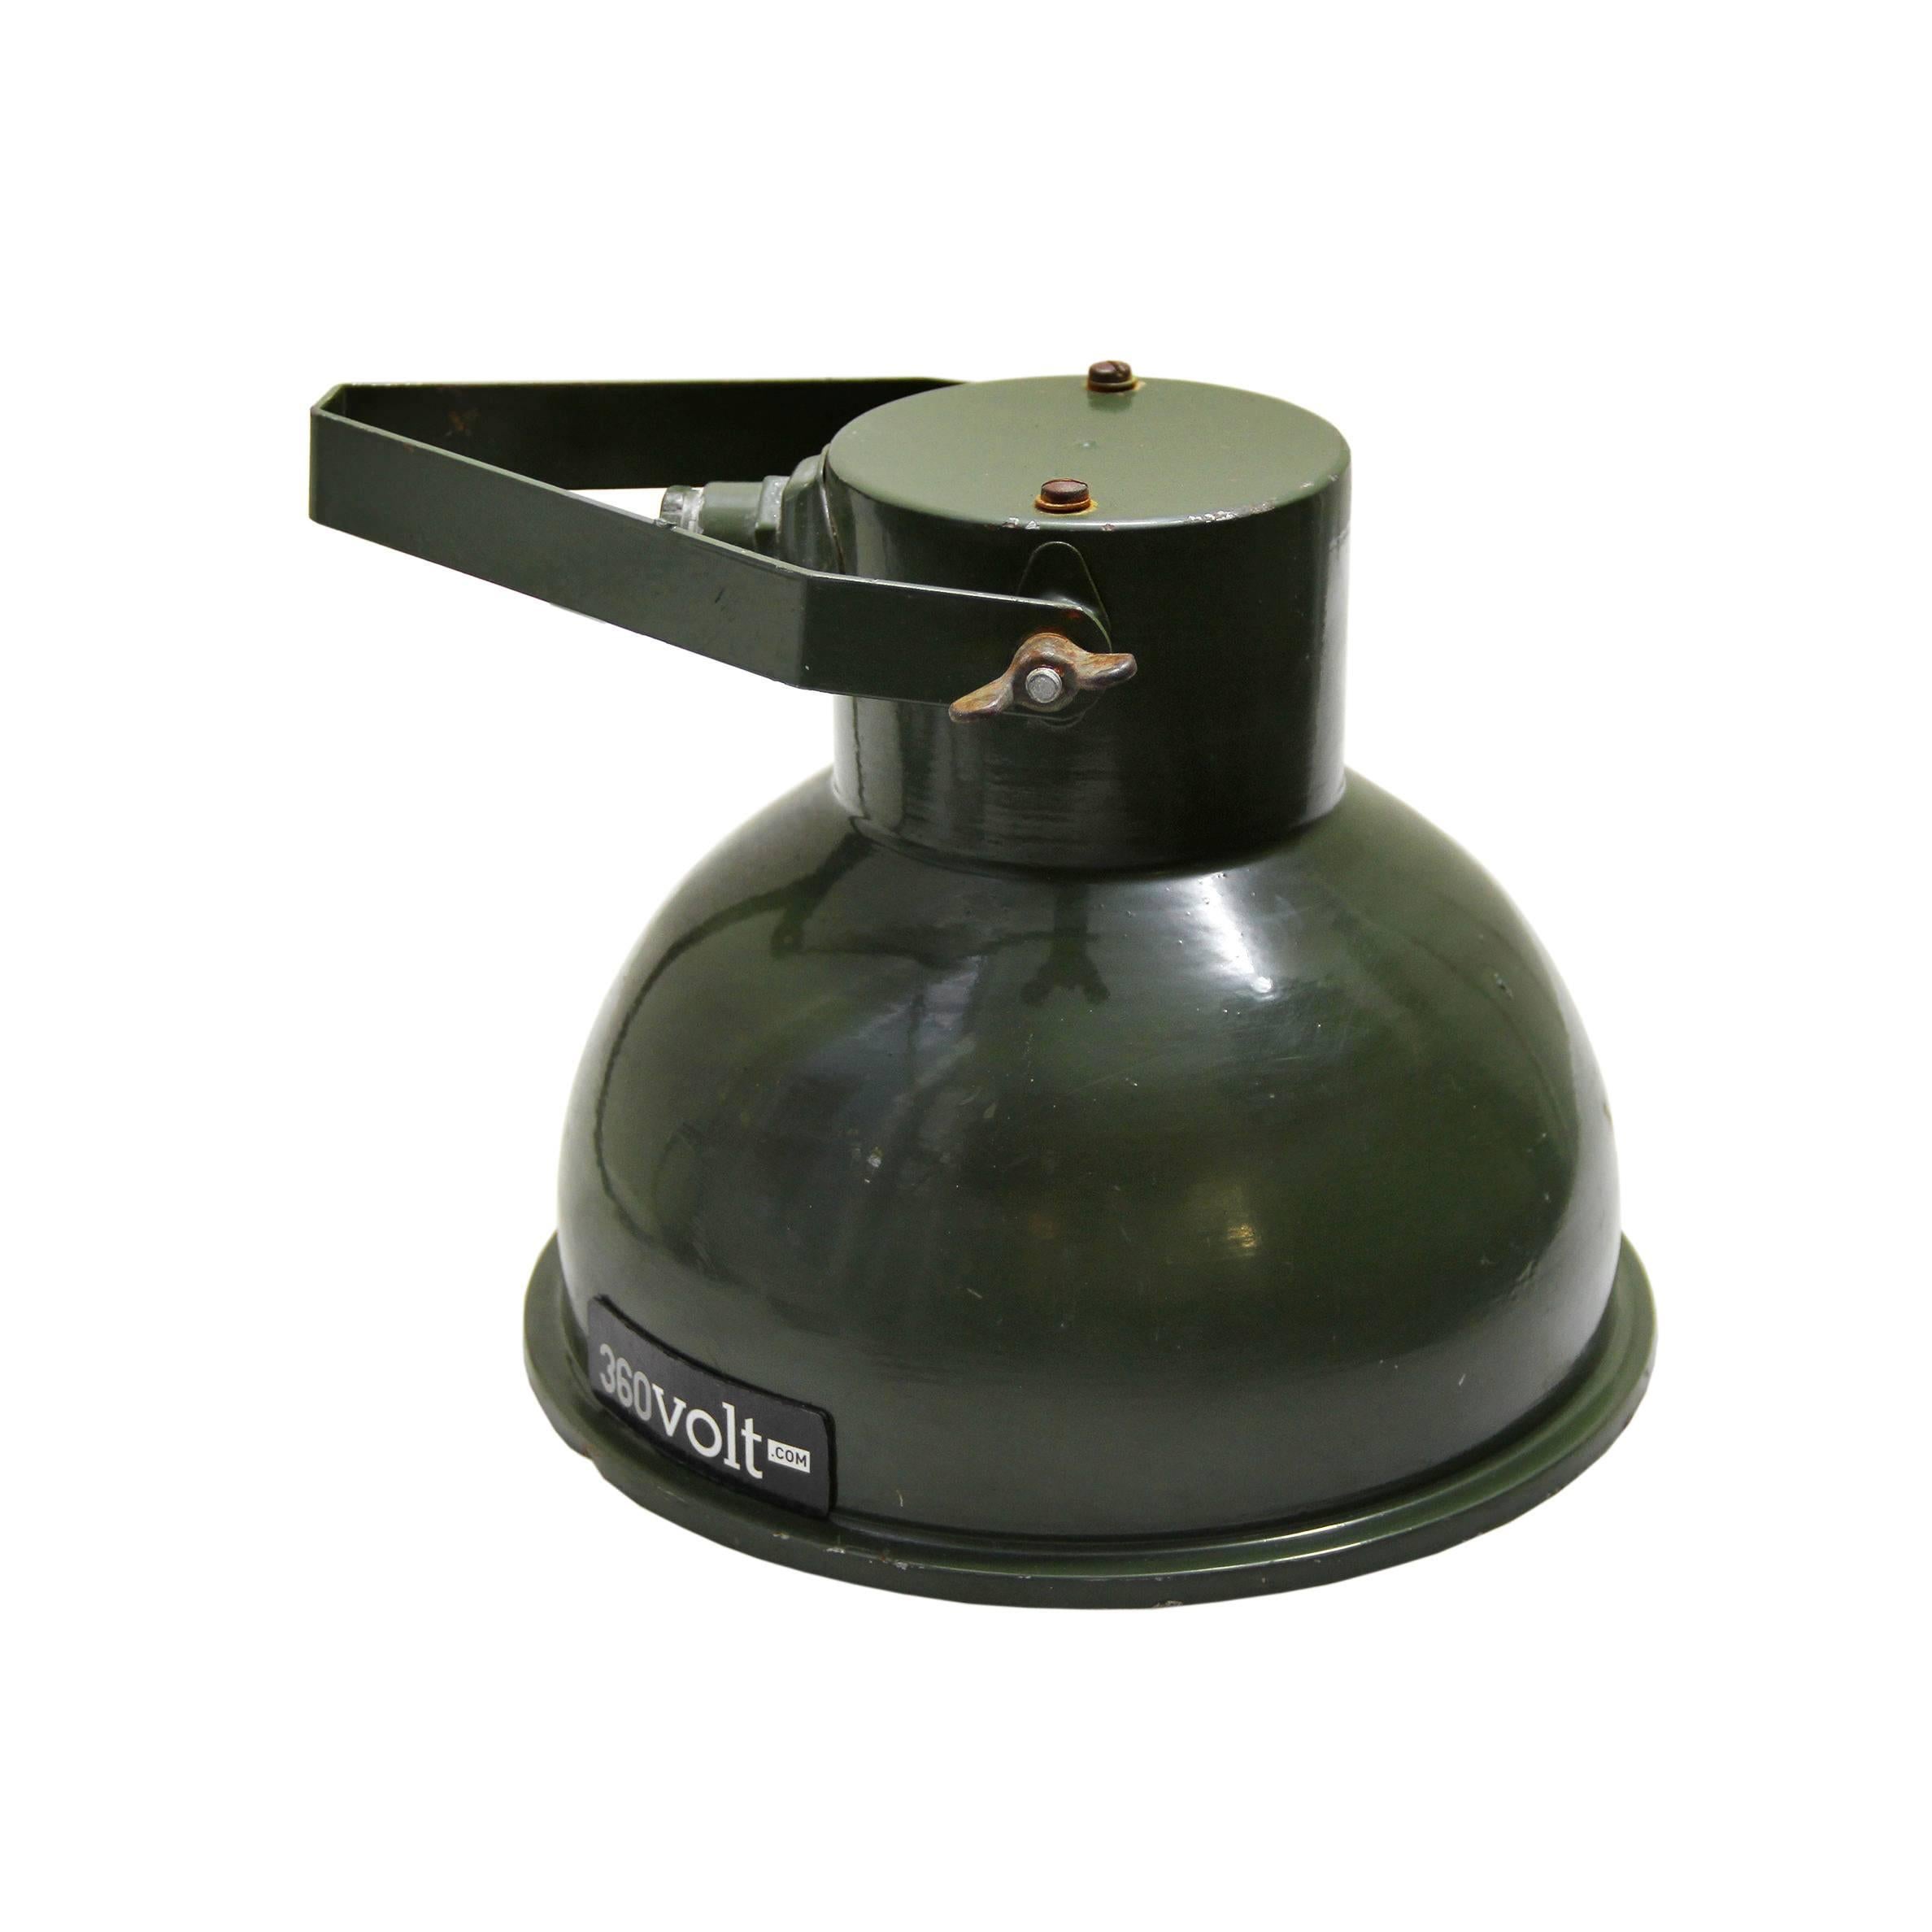 Army spot hanging or wall lighting. Army green aluminium. White interior.
Adjustable in angle.

Weight: 0.5 kg / 1.1 lb.

All lamps have been made suitable by international standards for incandescent light bulbs, energy-efficient and LED bulbs.